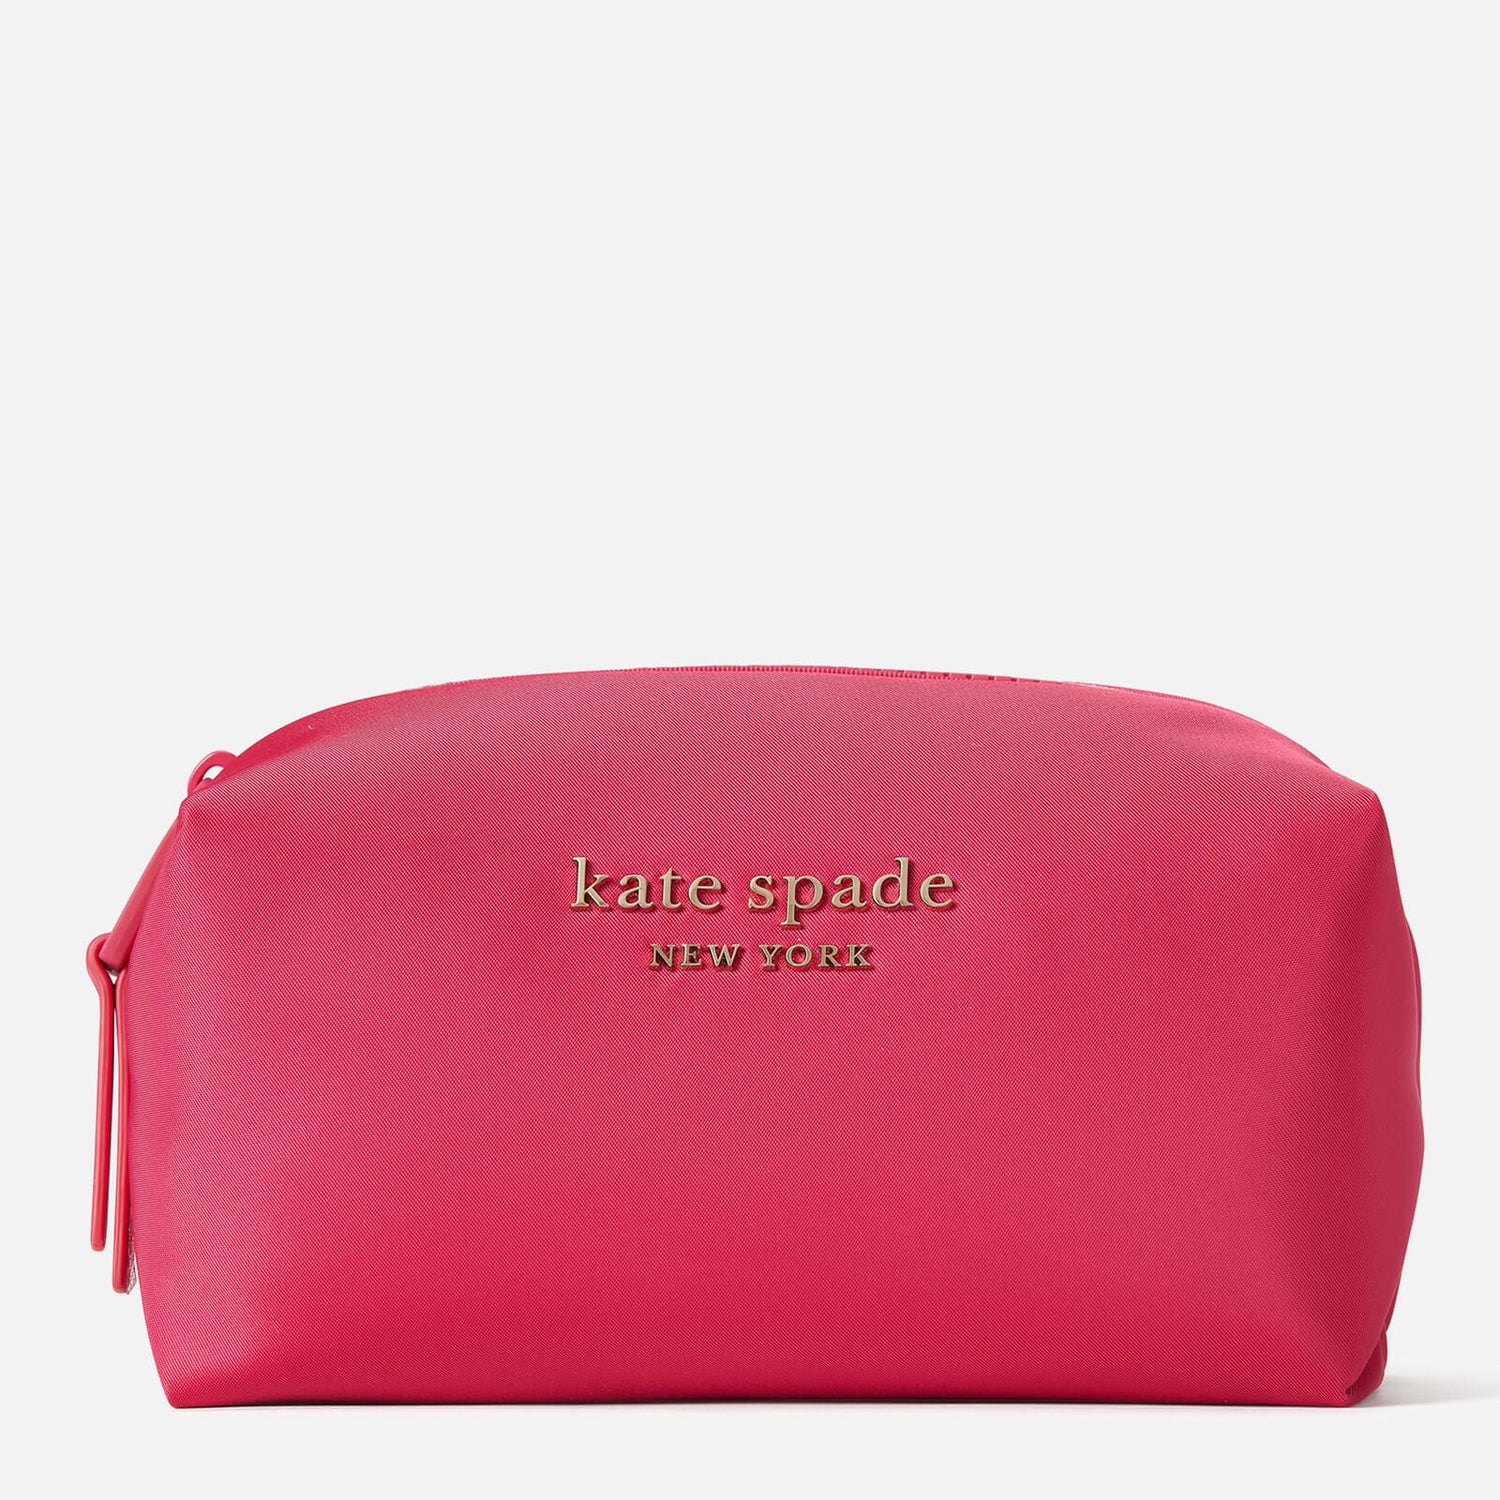 Kate Spade New York Women's Everything Puffy Cosmetic - Vermilion